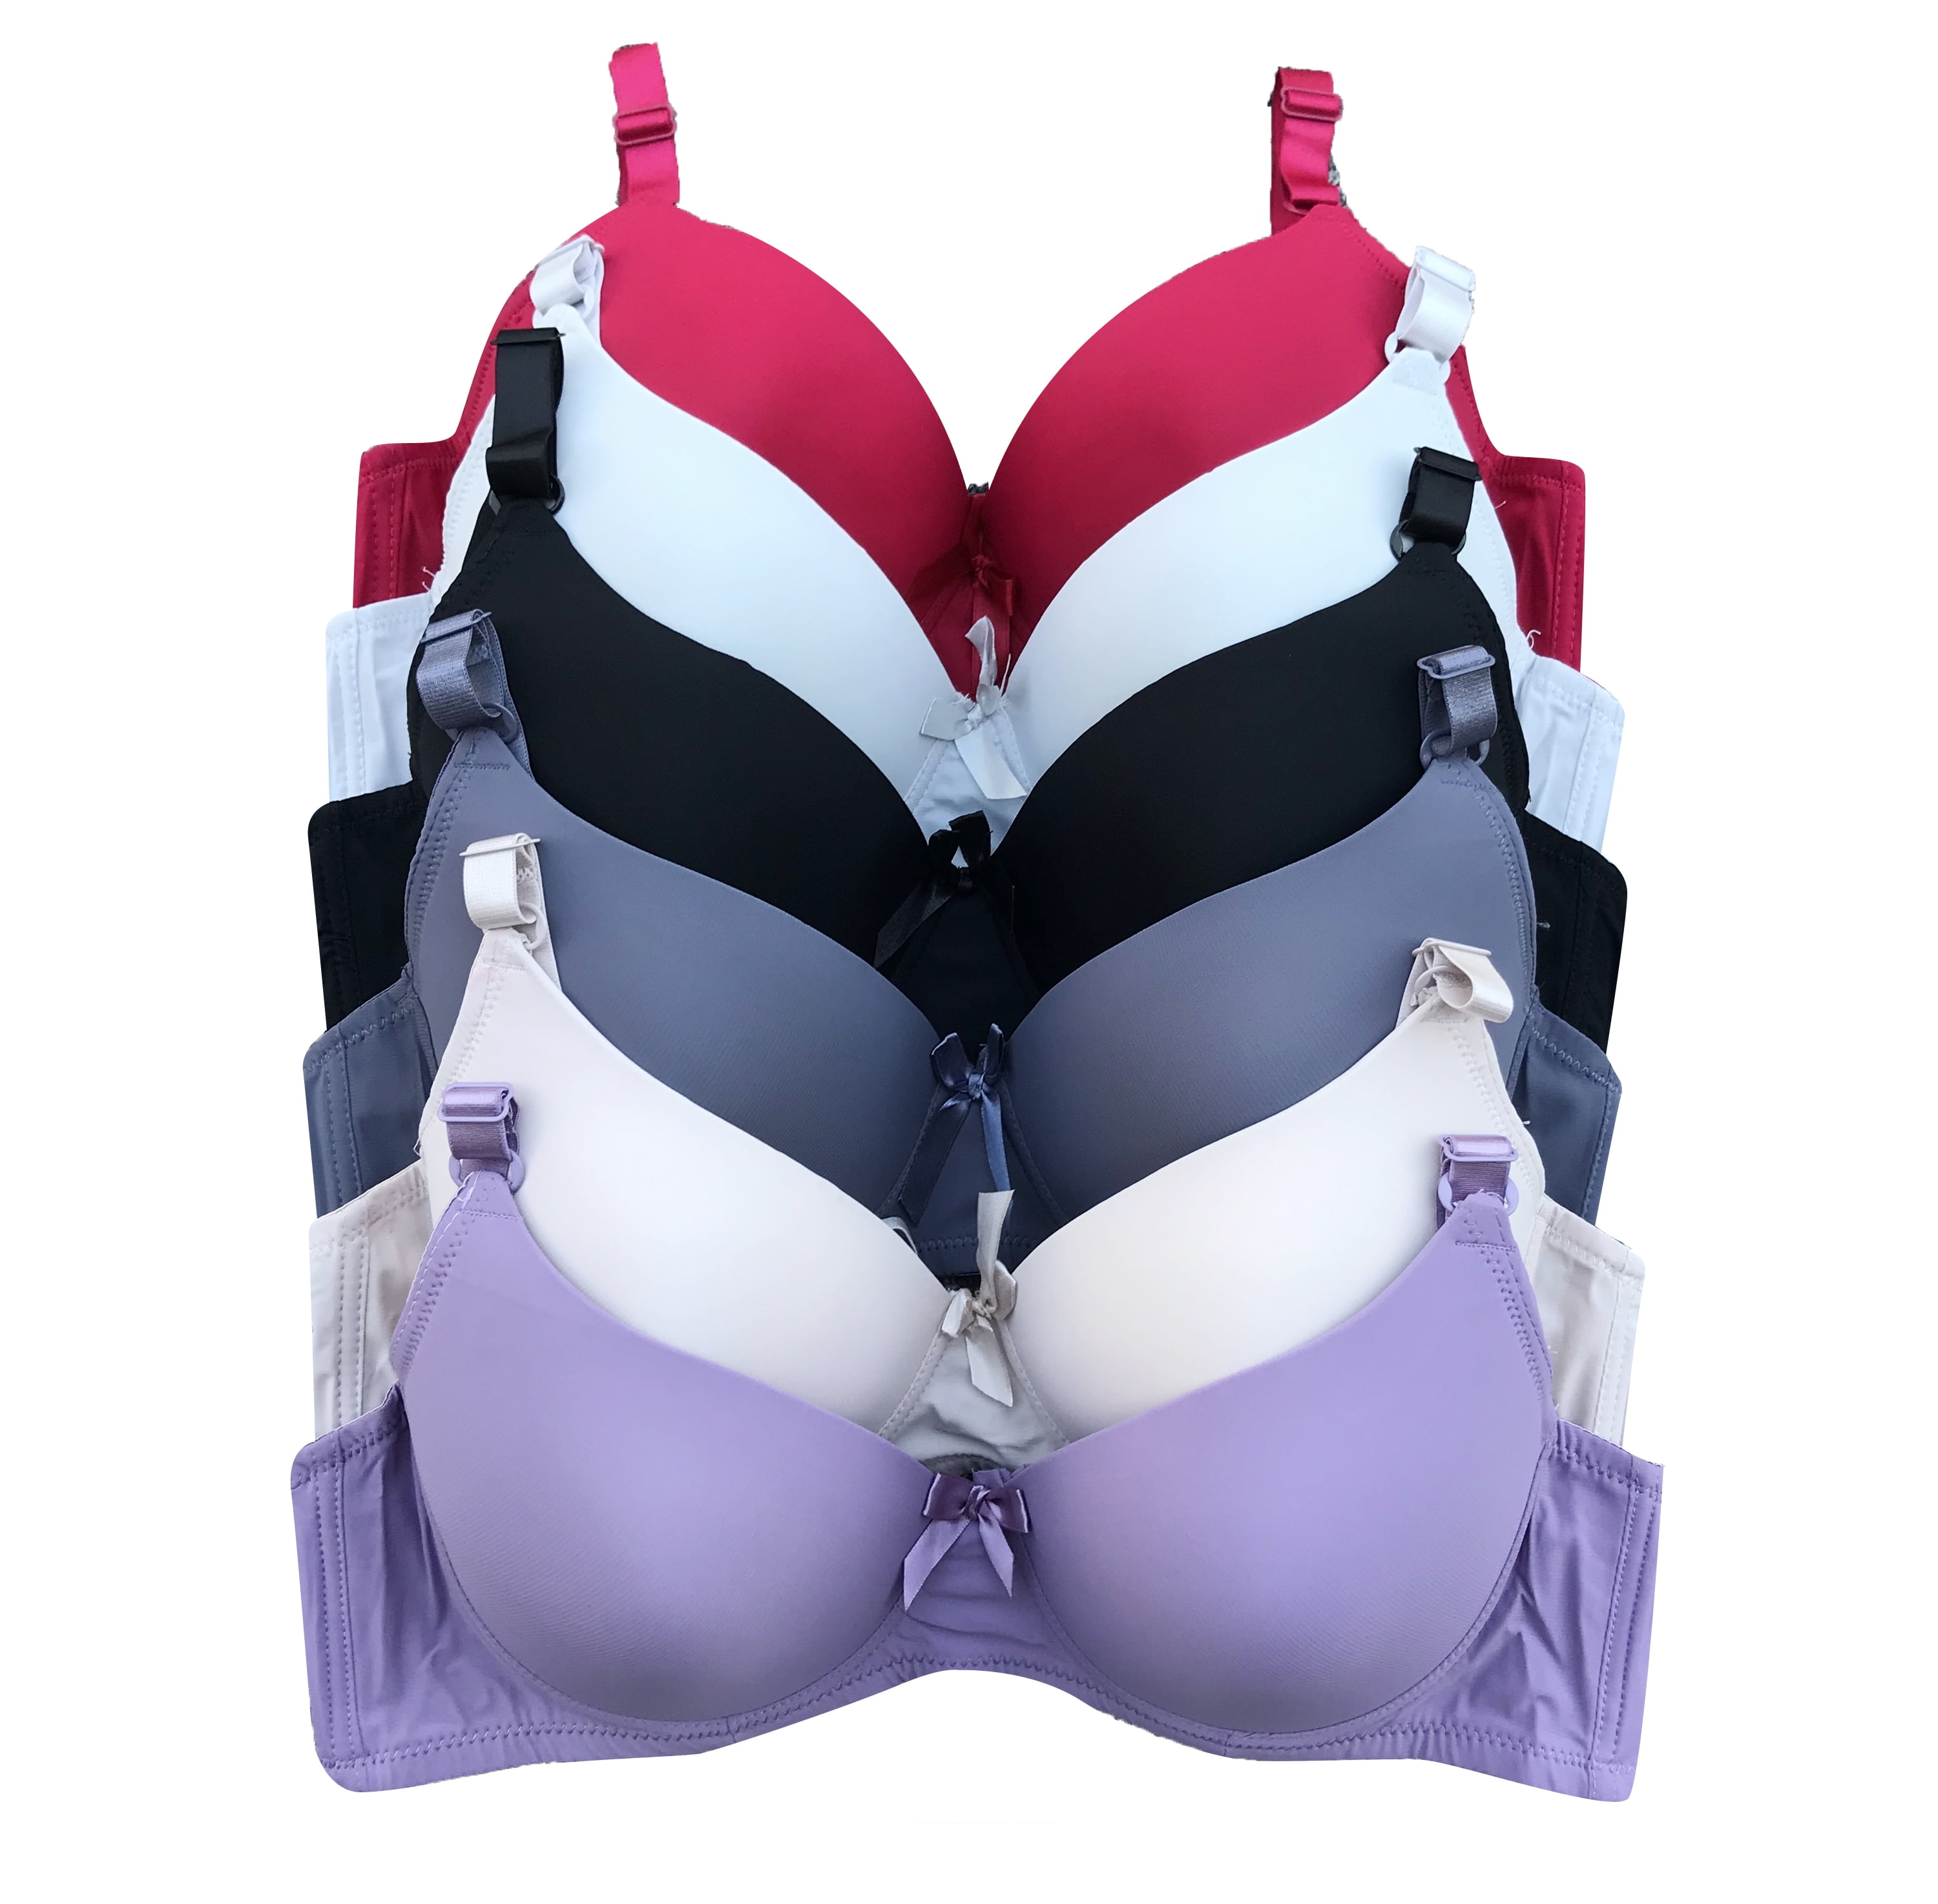 Women Bras 6 pack of Bra B cup C cup D cup DD cup Size 36DD (6337